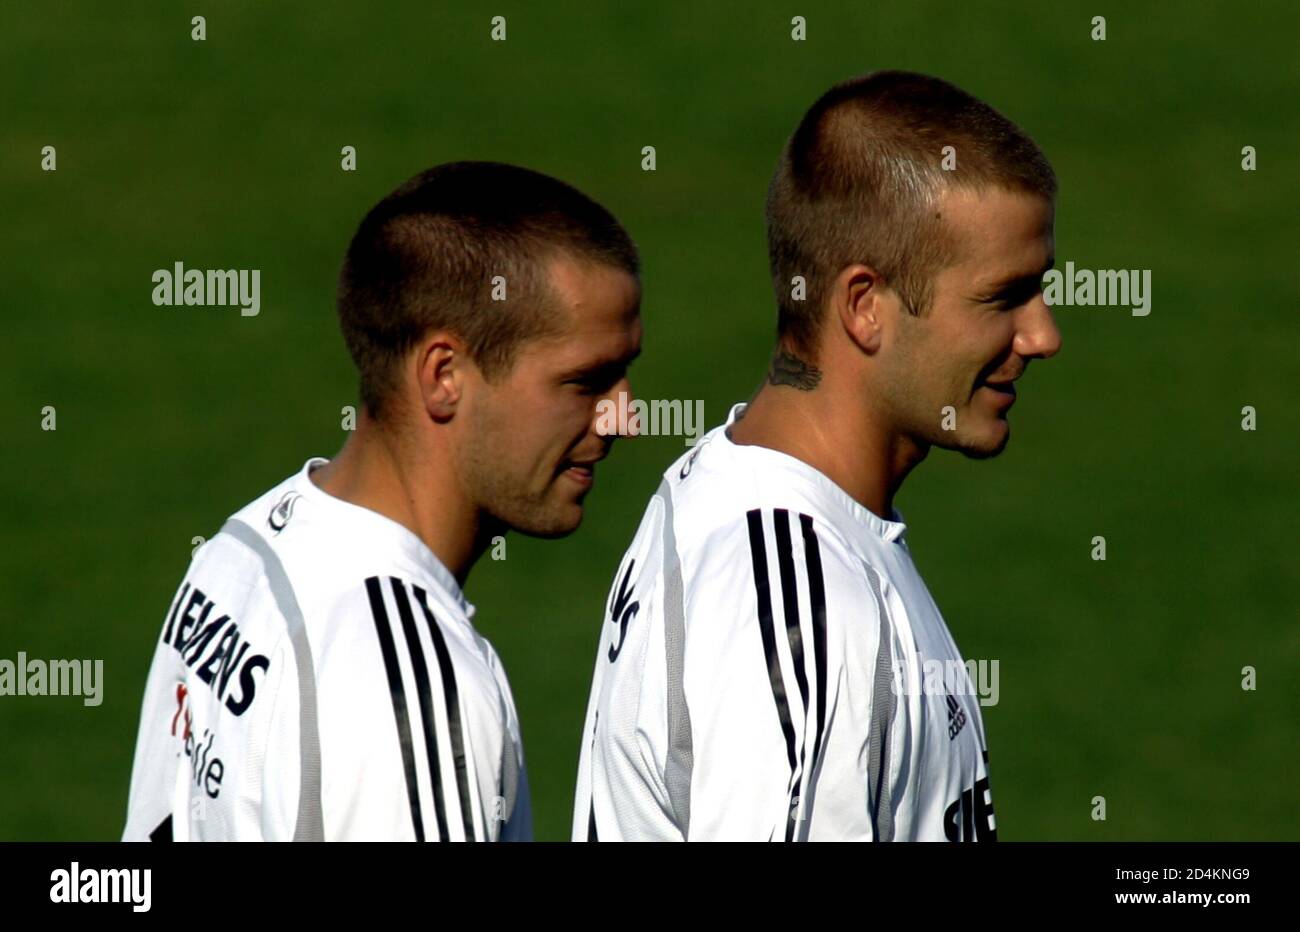 Real Madrid's new playerOwen with team mate Beckham during his first  training session with Real Madrid in Las Rozas. Real Madrid's new British  player Michael Owen (L) stands behind his team mate